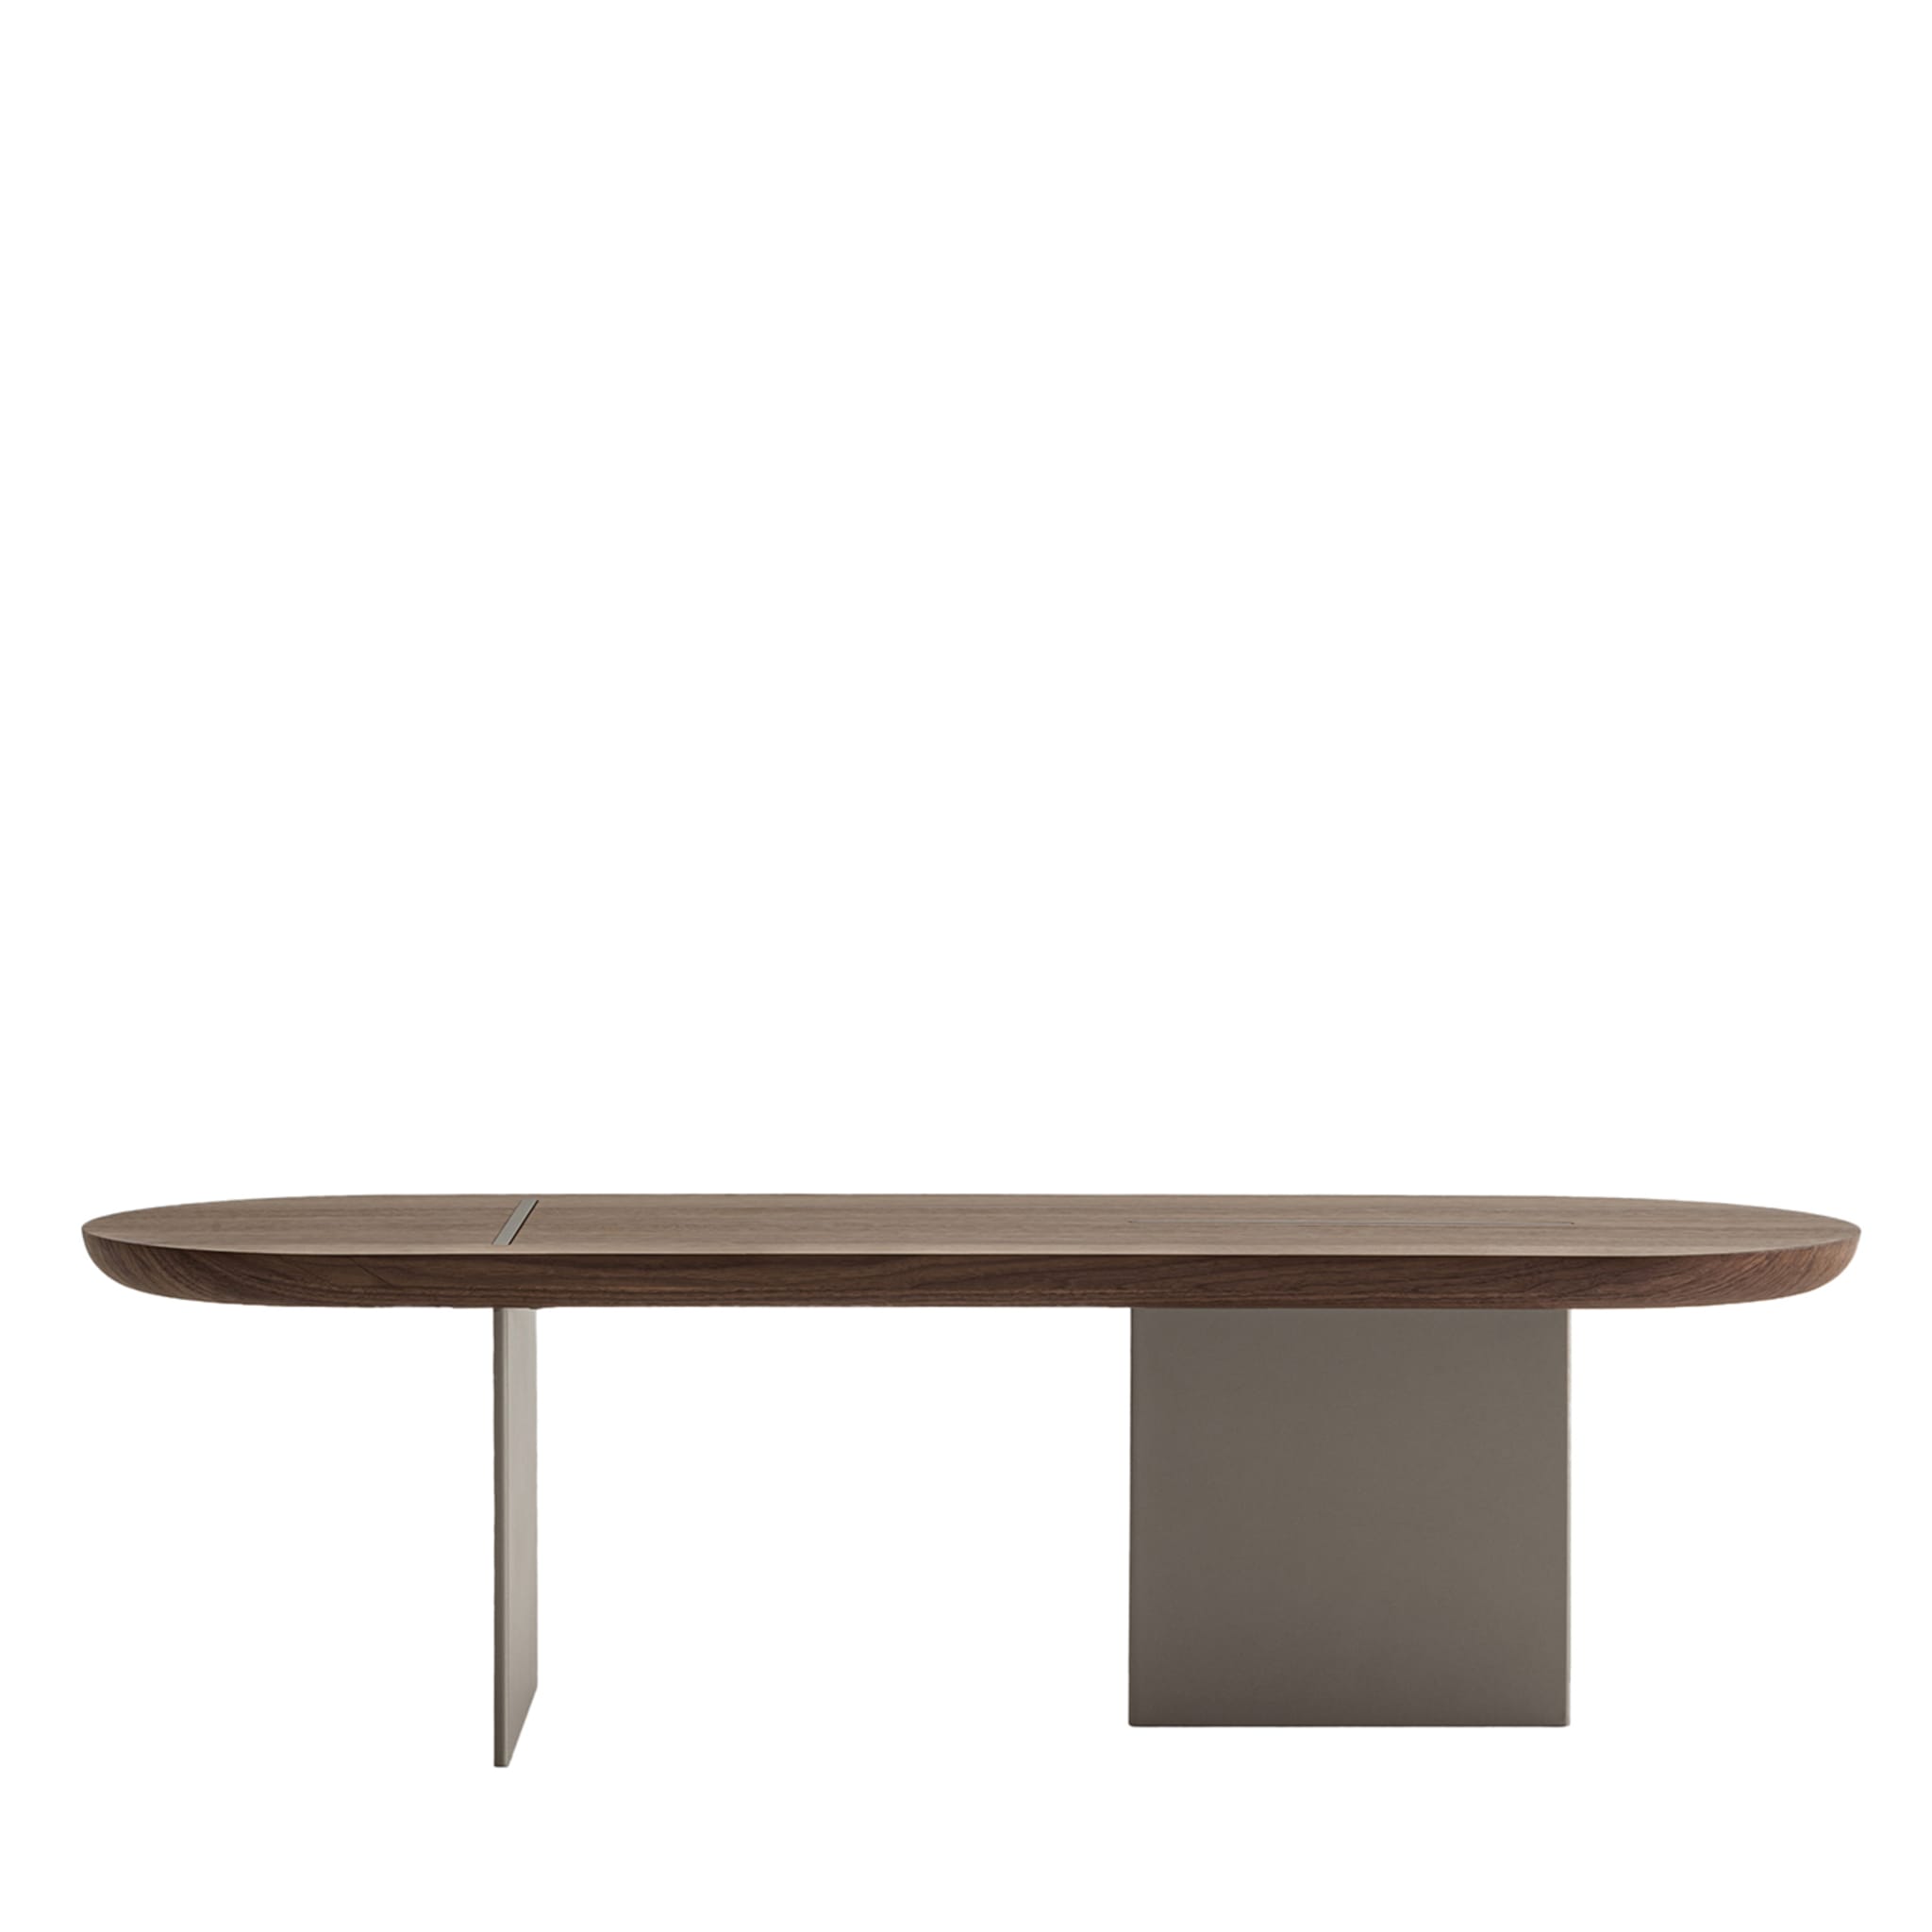 Baguette Tall Rounded Canaletto Walnut Coffee Table - Vue principale